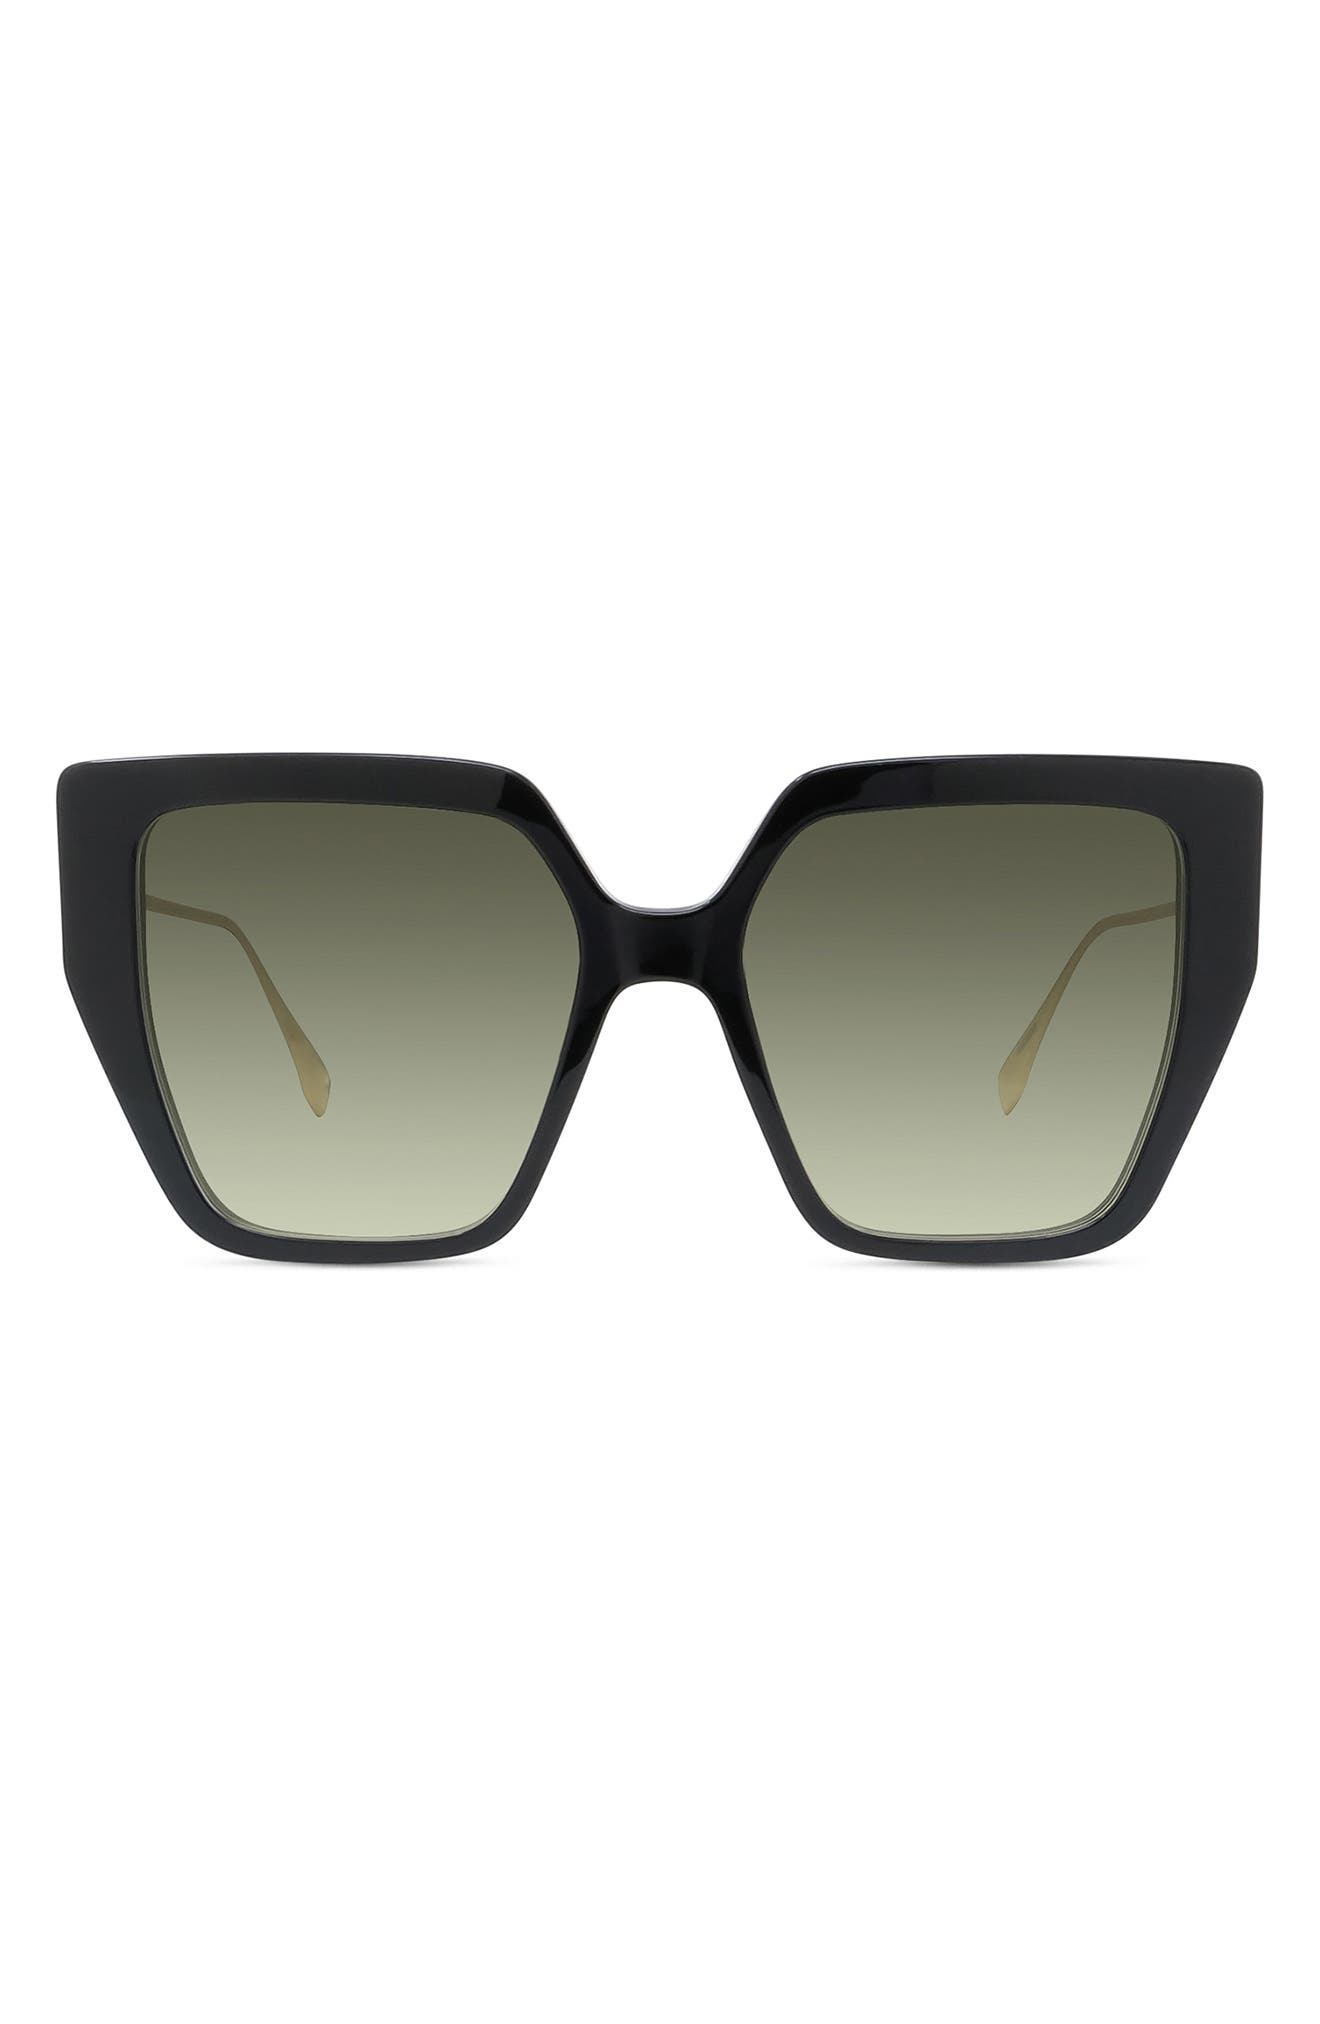 Fendi Baguette 55mm Butterfly Sunglasses in Shiny Black /Gradient Green at Nordstrom